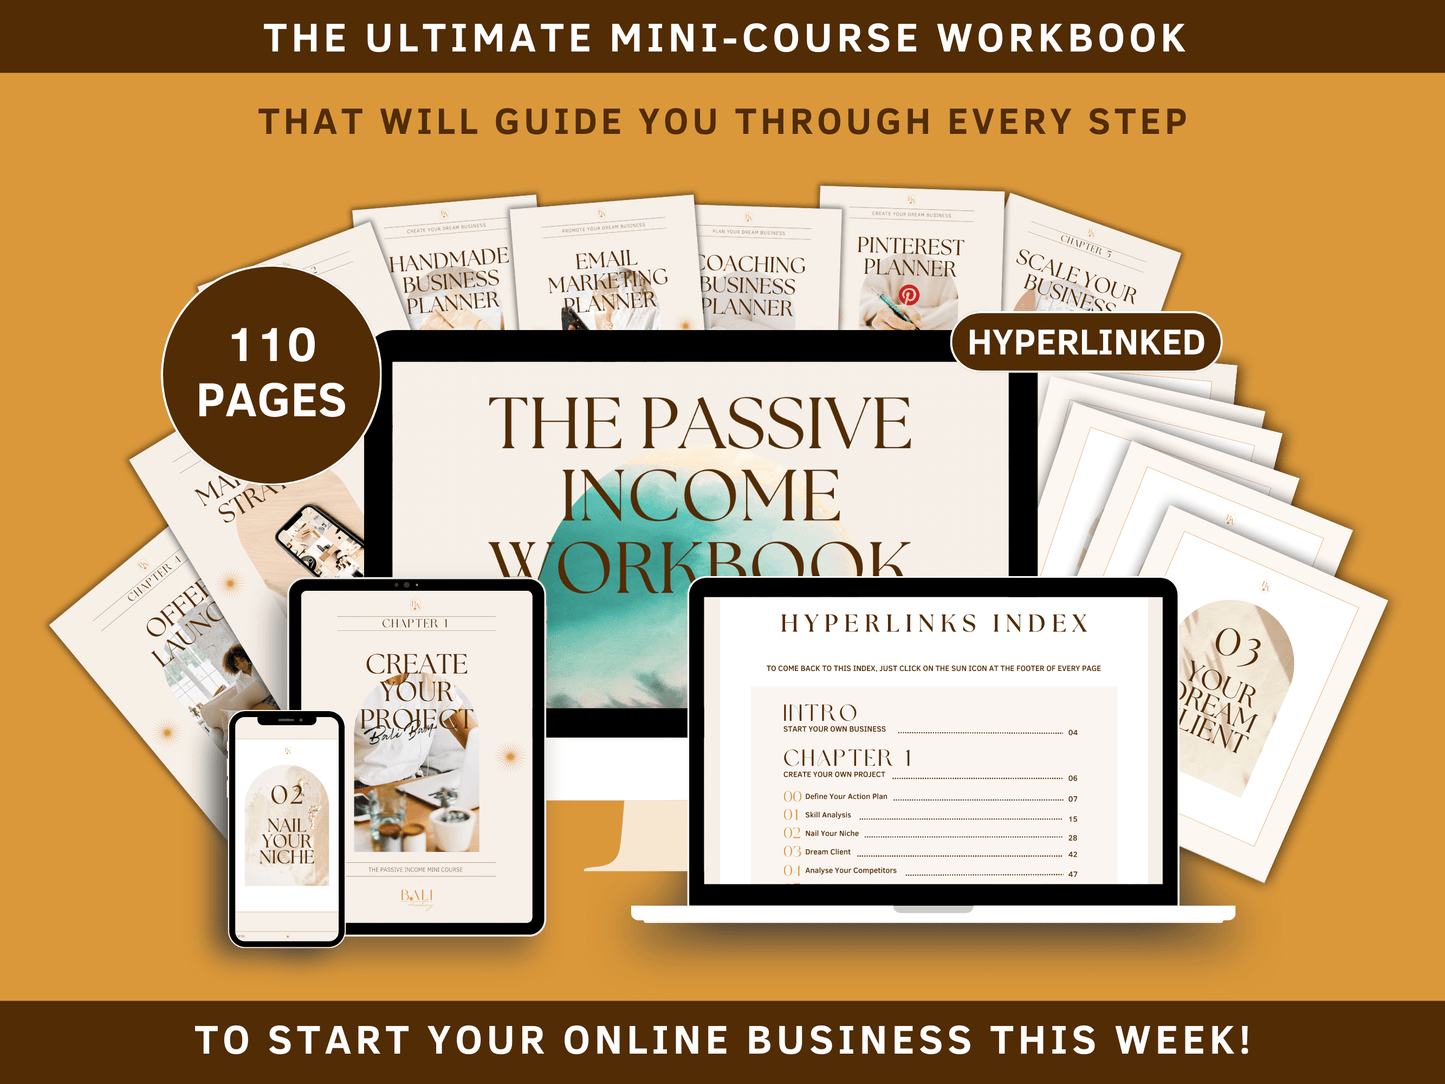 The Passive Income done-for-you Workbook Mini-Course to start your online business this week! This workbook includes planners and guides from skill analysis, niche choice and competitor analysis to ideal client and offer outline which are going to help you reach financial freedom.  